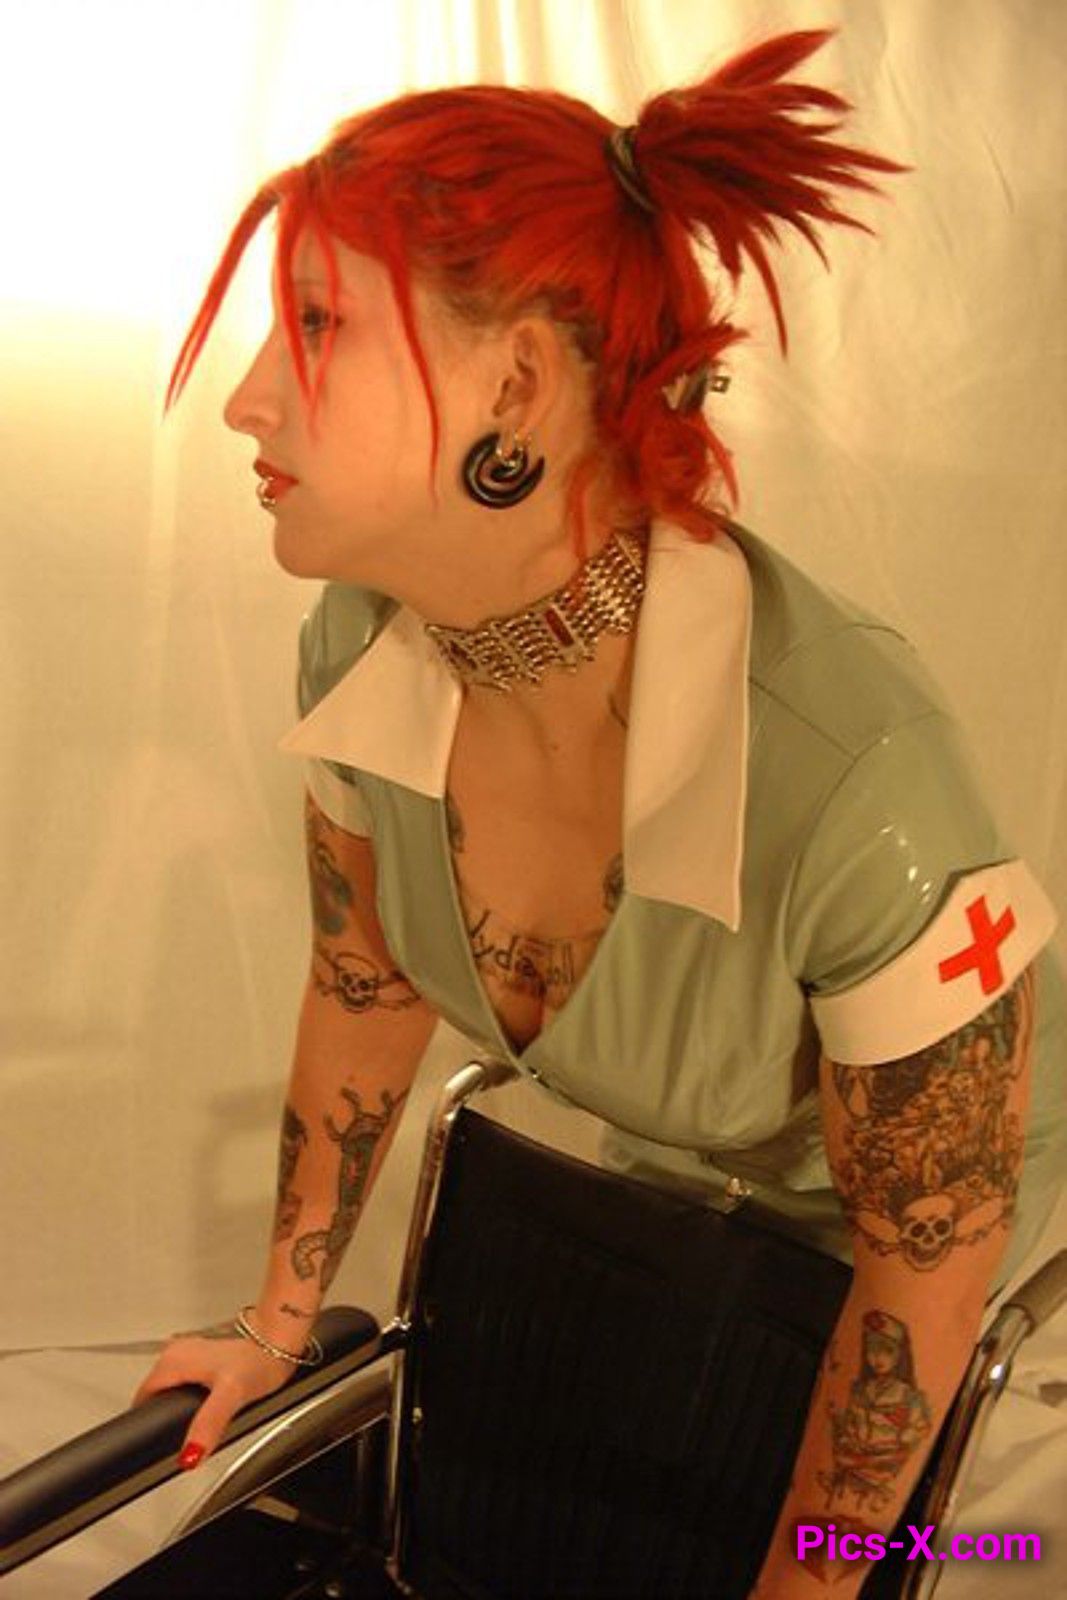 Pigtailed punk rock hottie with red hair showing off her ink - Punk Rock Girlfriend - Image 3